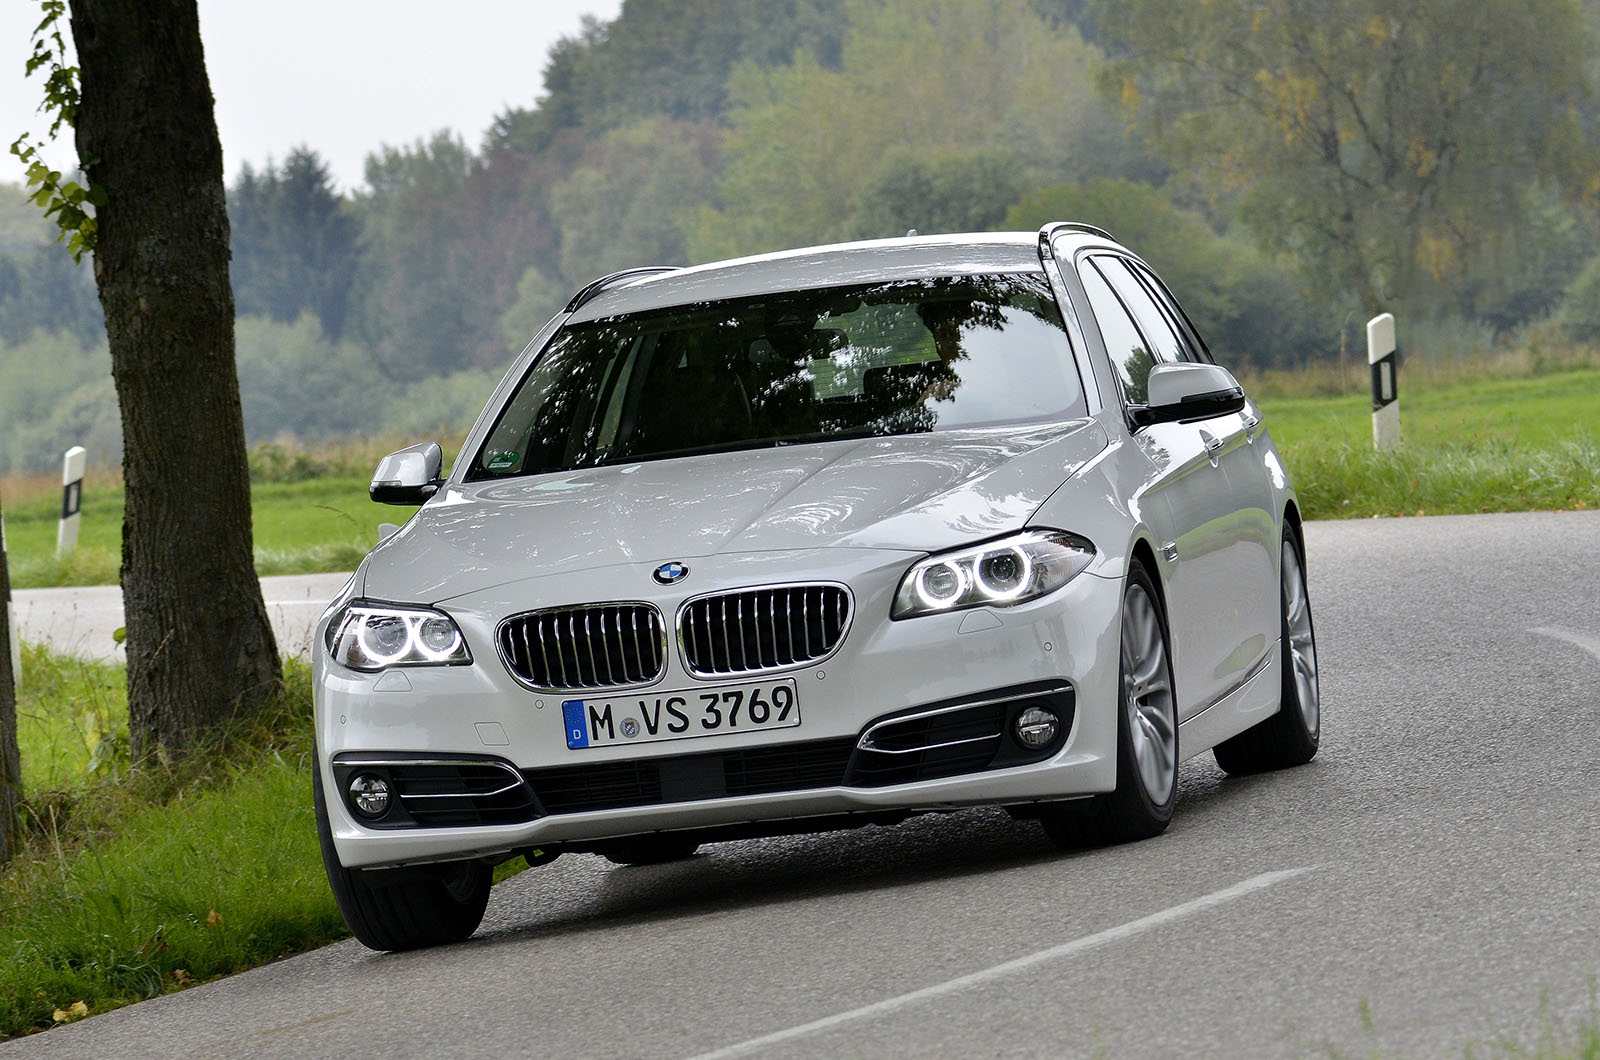 Used bmw 520d touring review #5